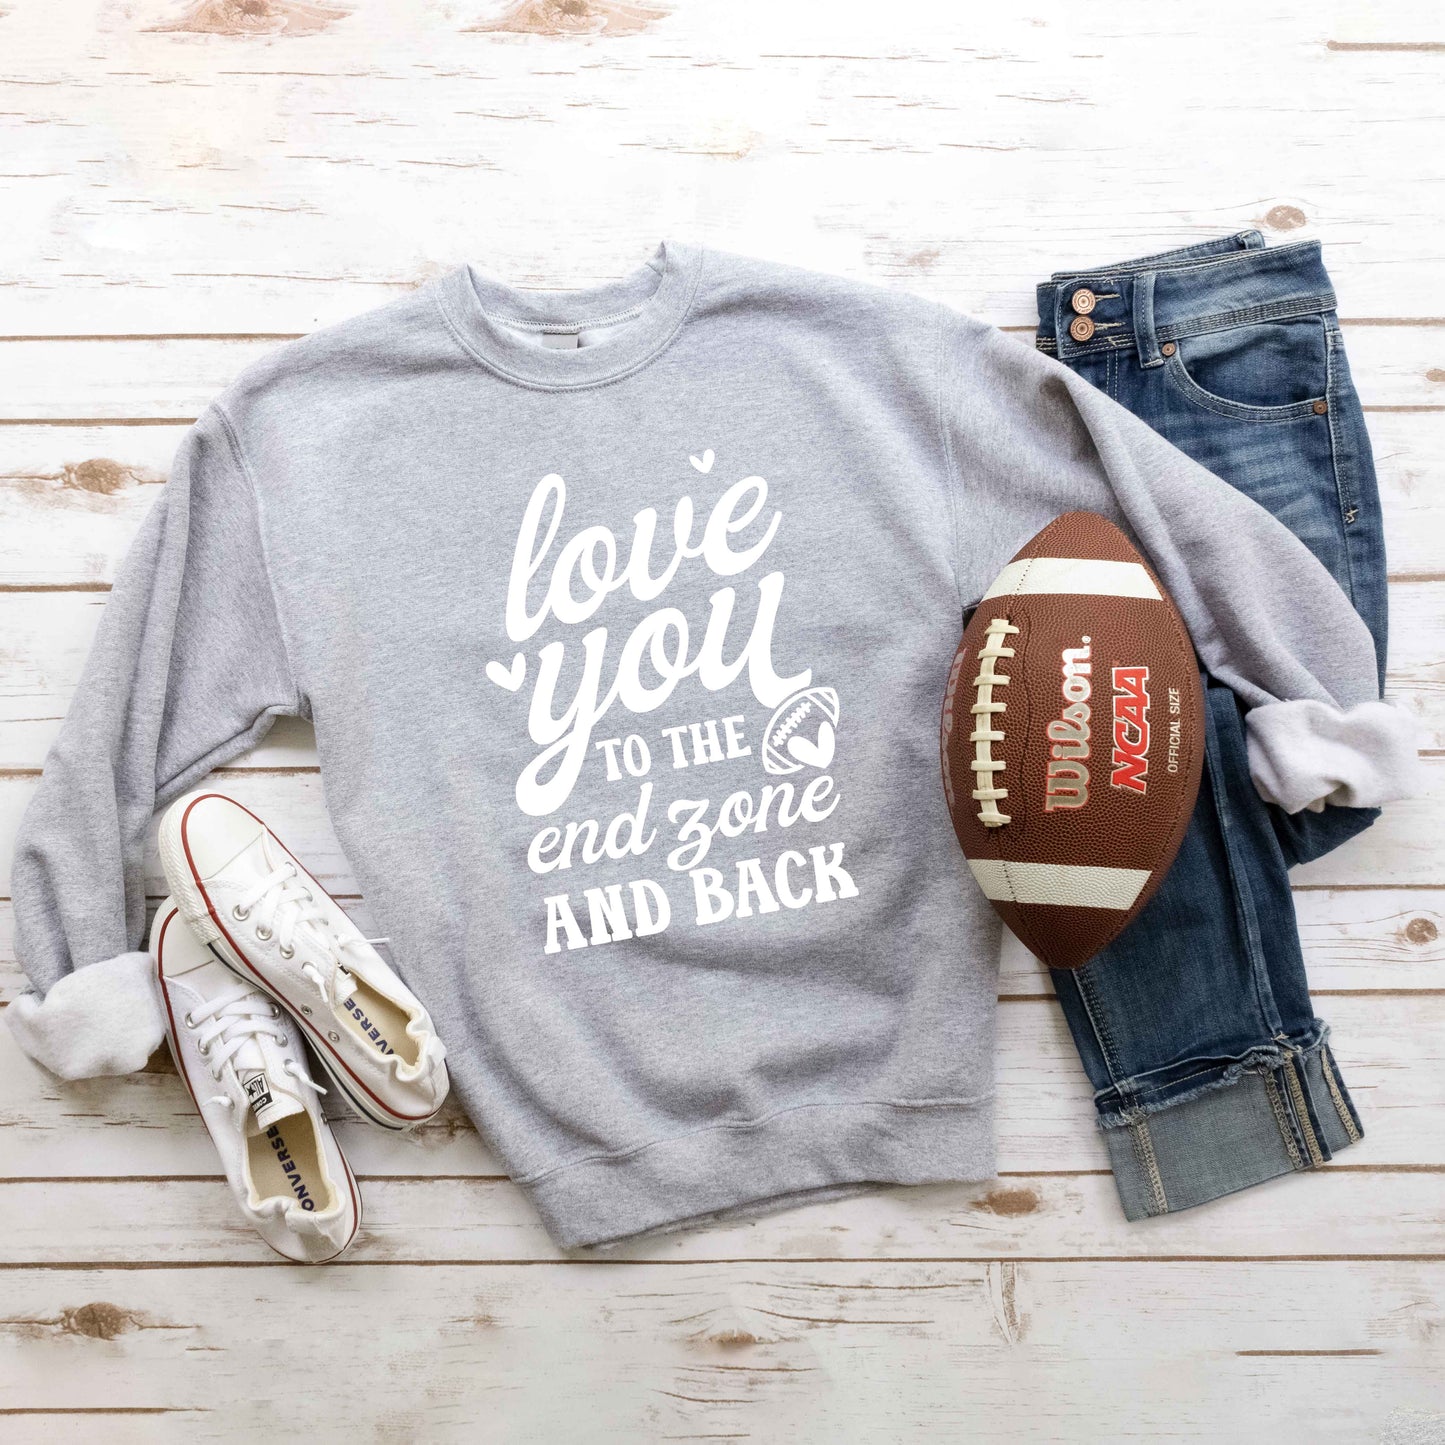 To The End Zone And Back | Sweatshirt